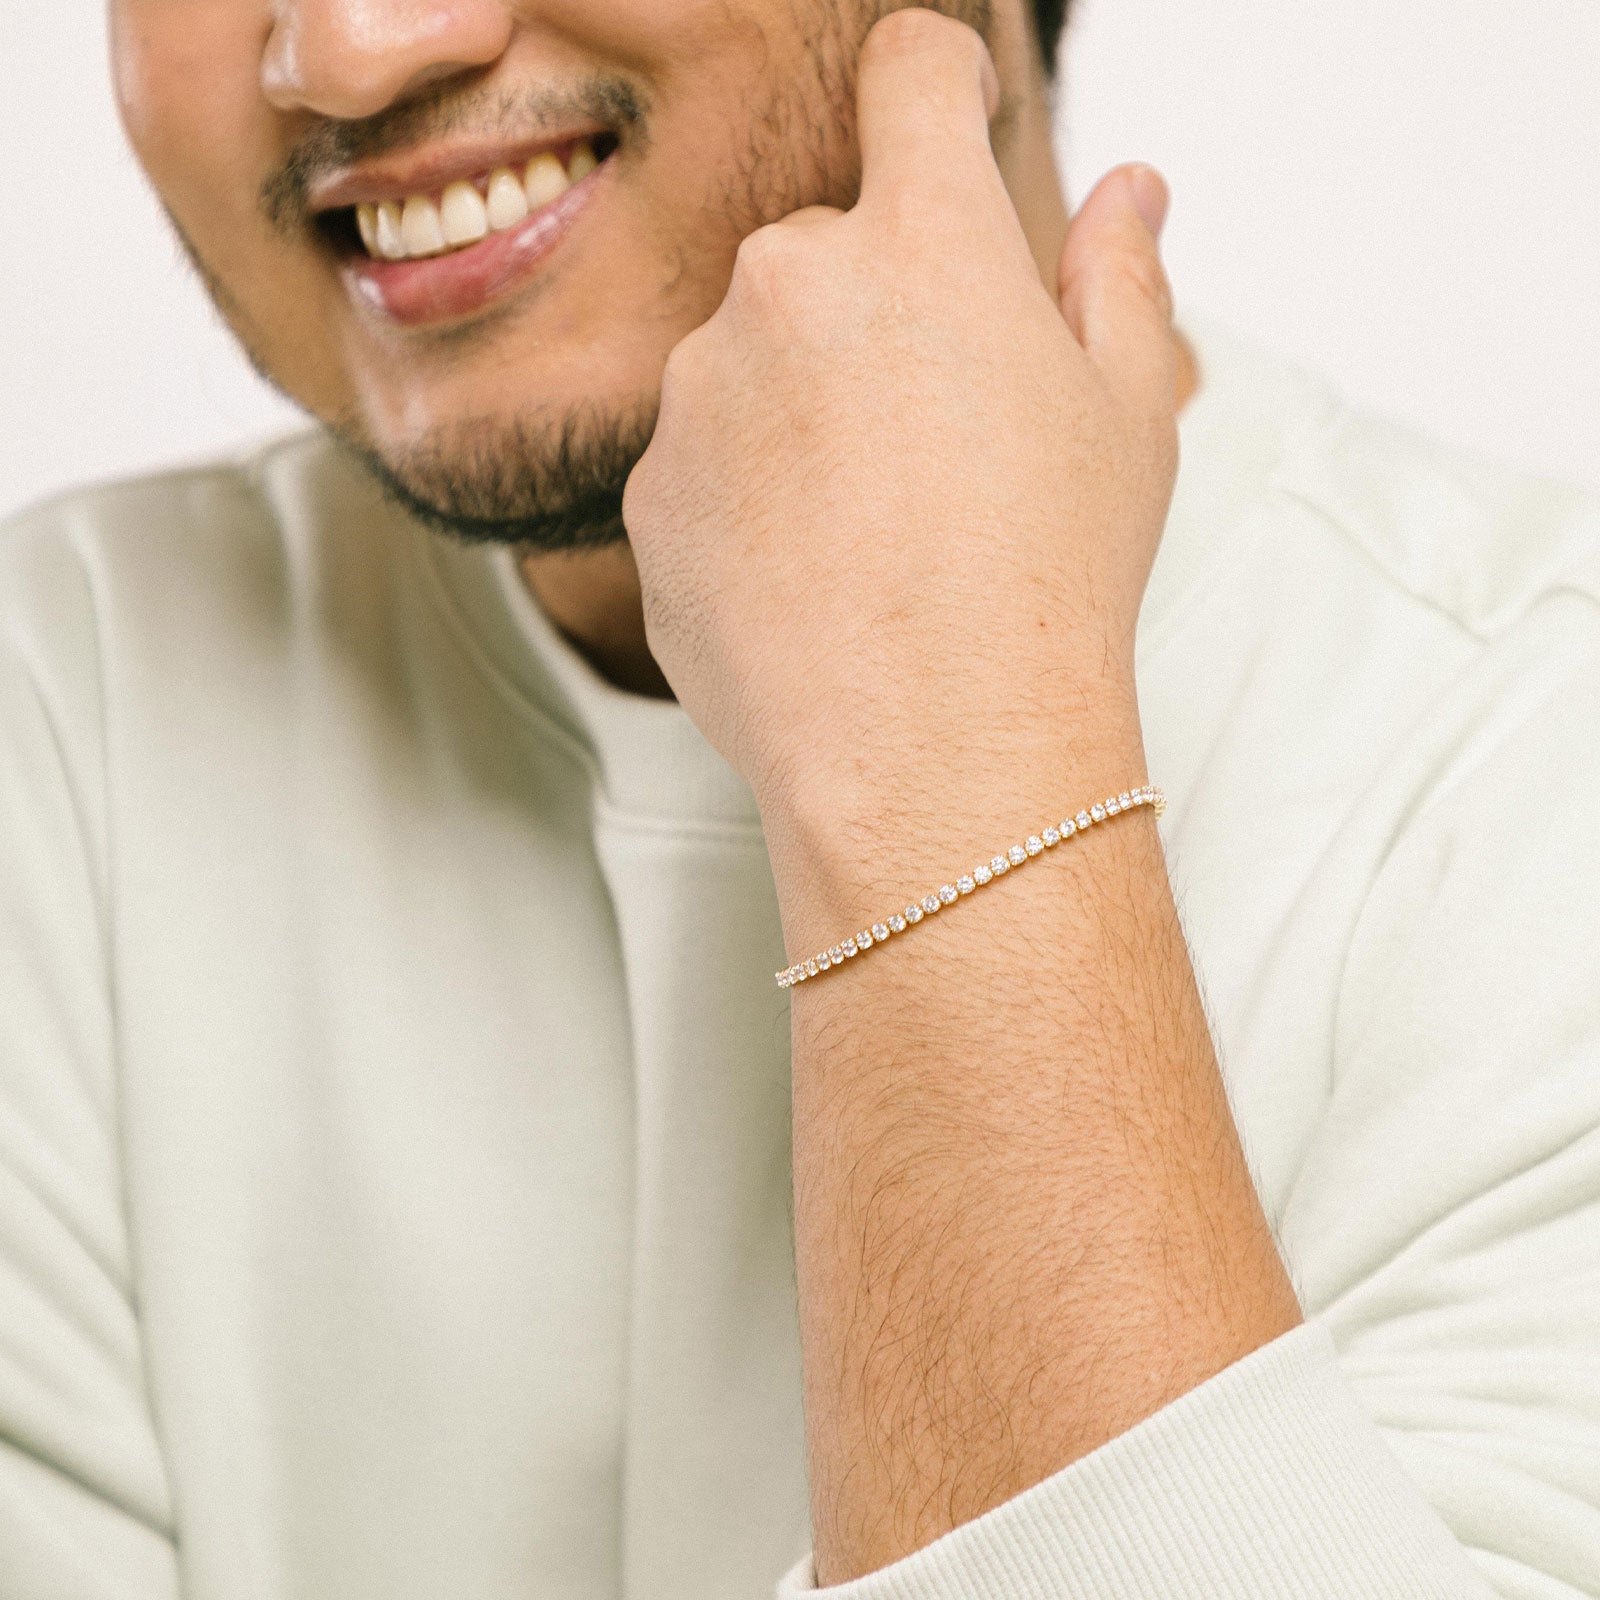 A model wearing the Tennis Bracelet is an exquisite companion to its sister piece, the Classic Tennis Necklace. Meticulously constructed from 14K gold plated metal, it is embellished with shimmering Cubic Zirconia stones. Additionally, its design is exceptionally enduring - it is tarnish-resistant, water-resistant, nickel-free, and hypoallergenic.